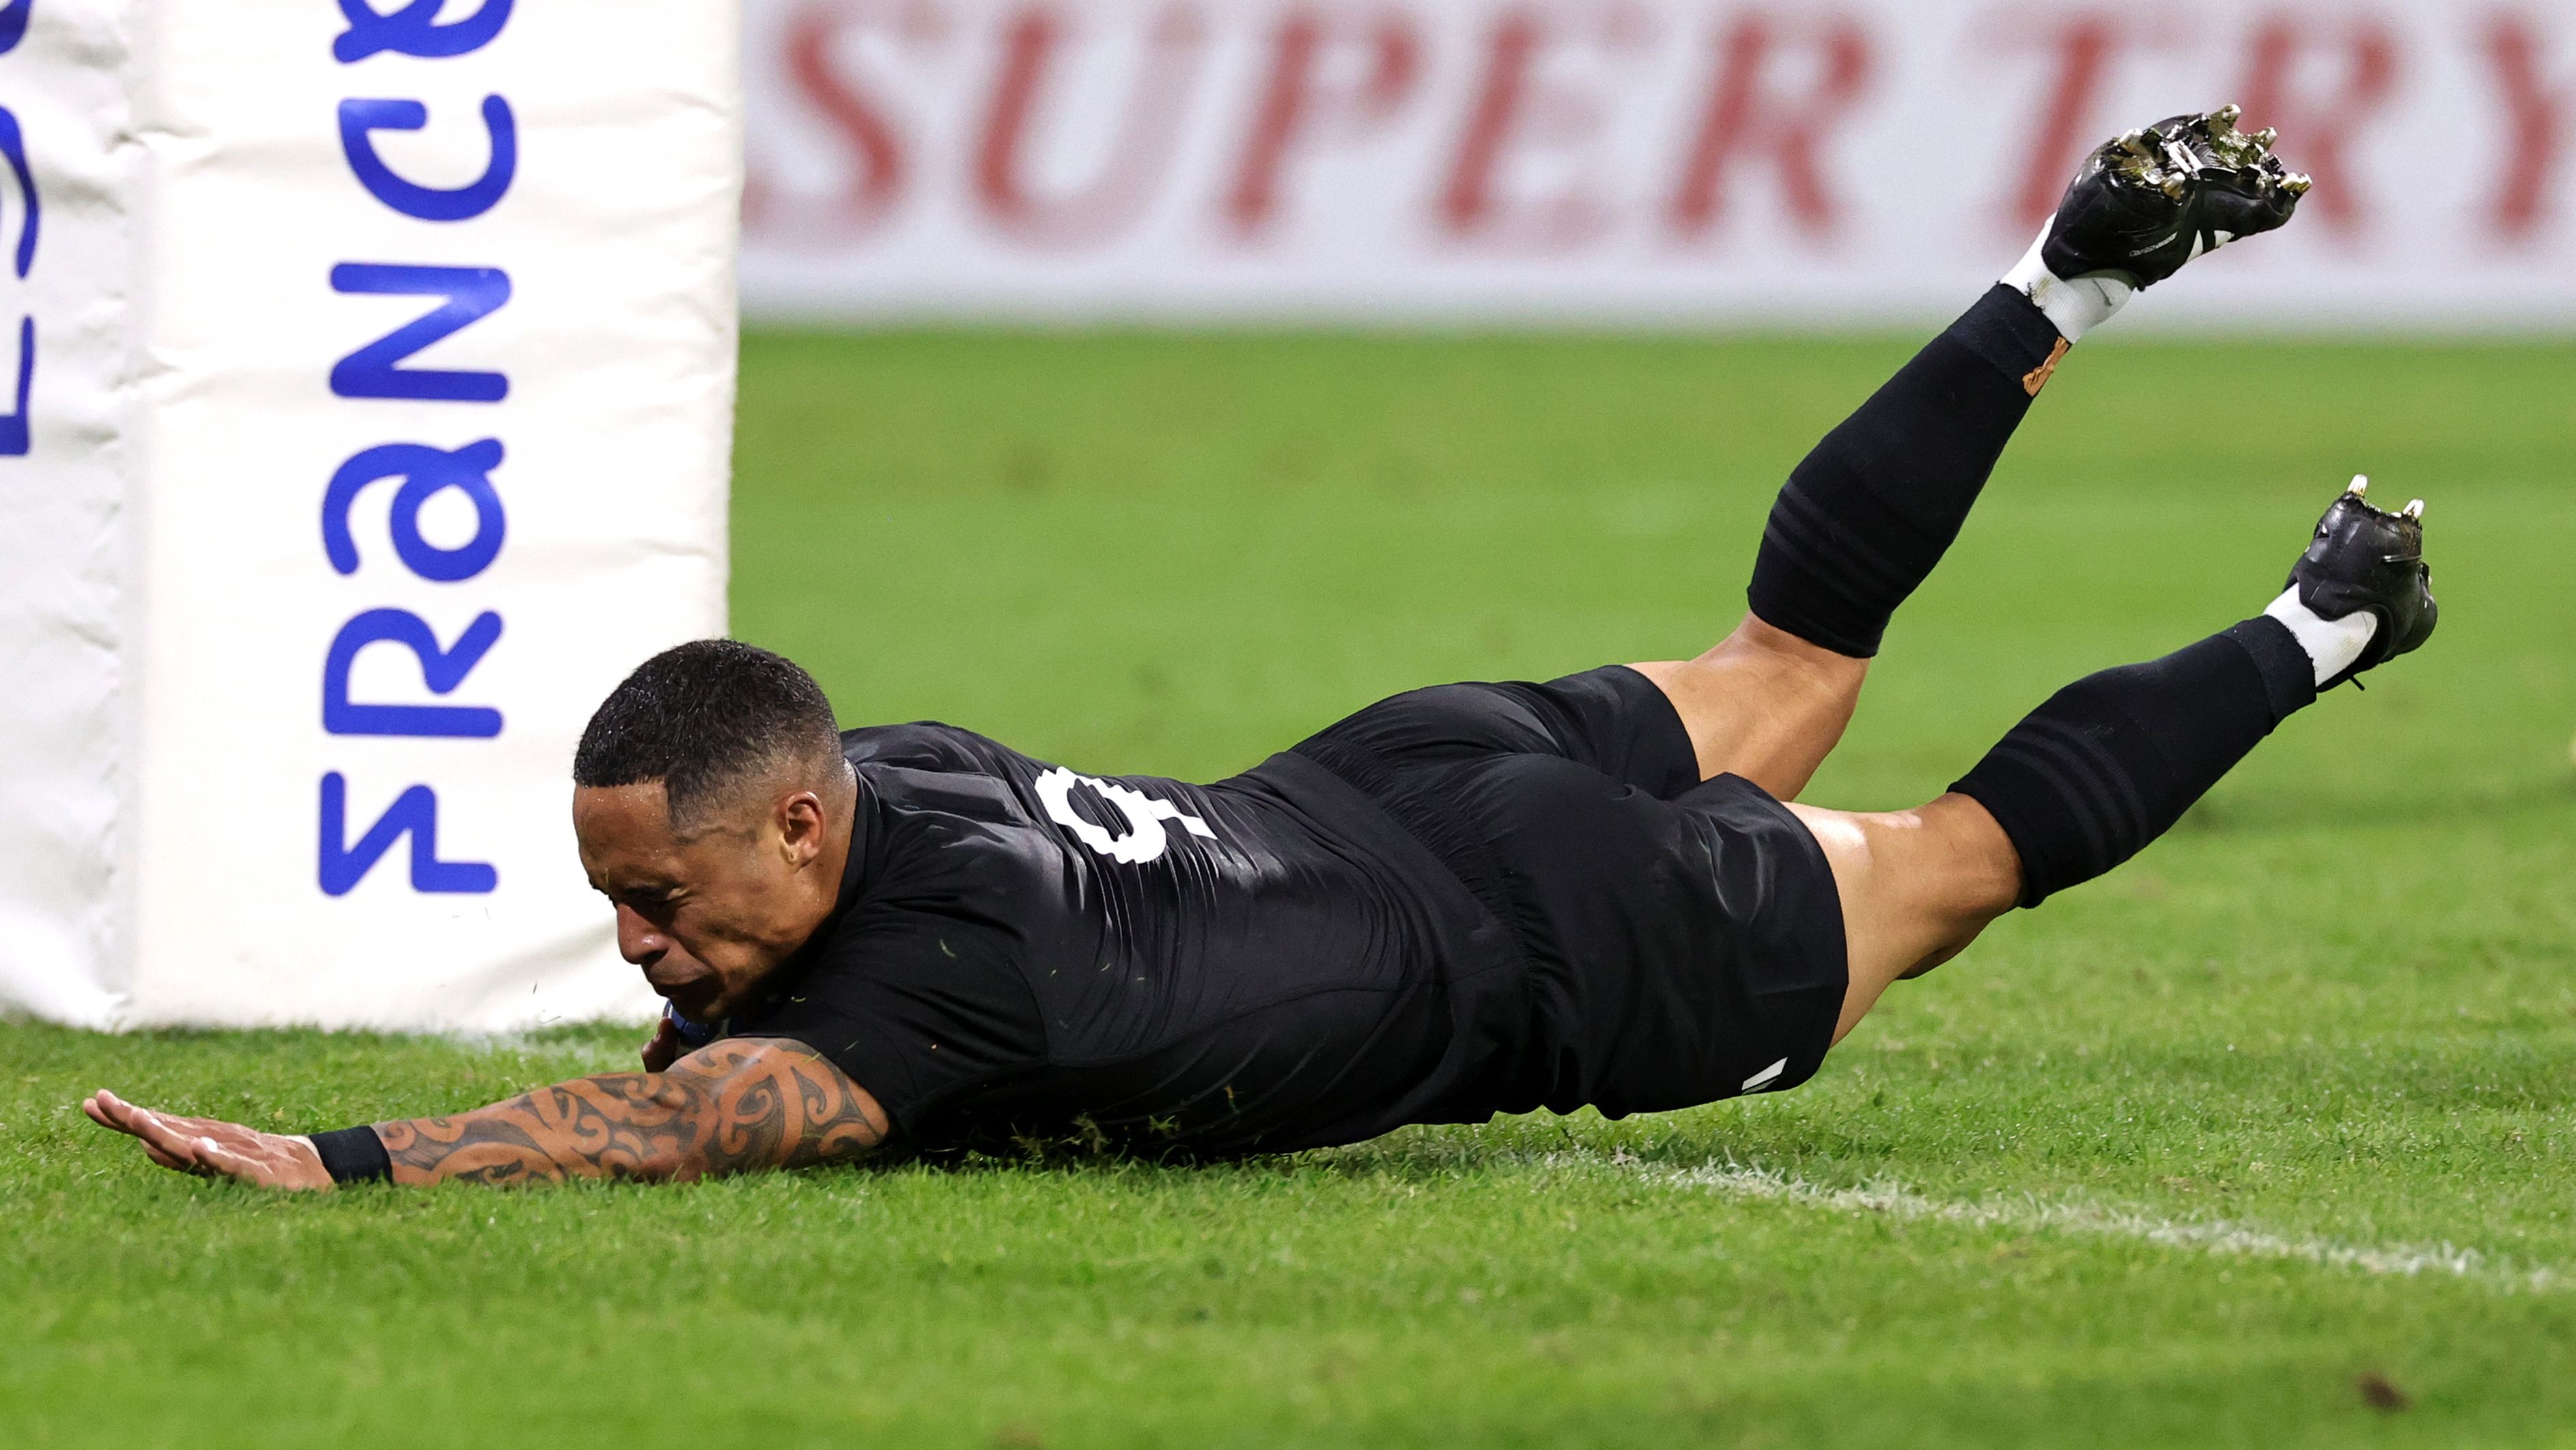 Aaron Smith scores his third try for New Zealand in his side&#x27;s 96-17 demolition derby over Italy.